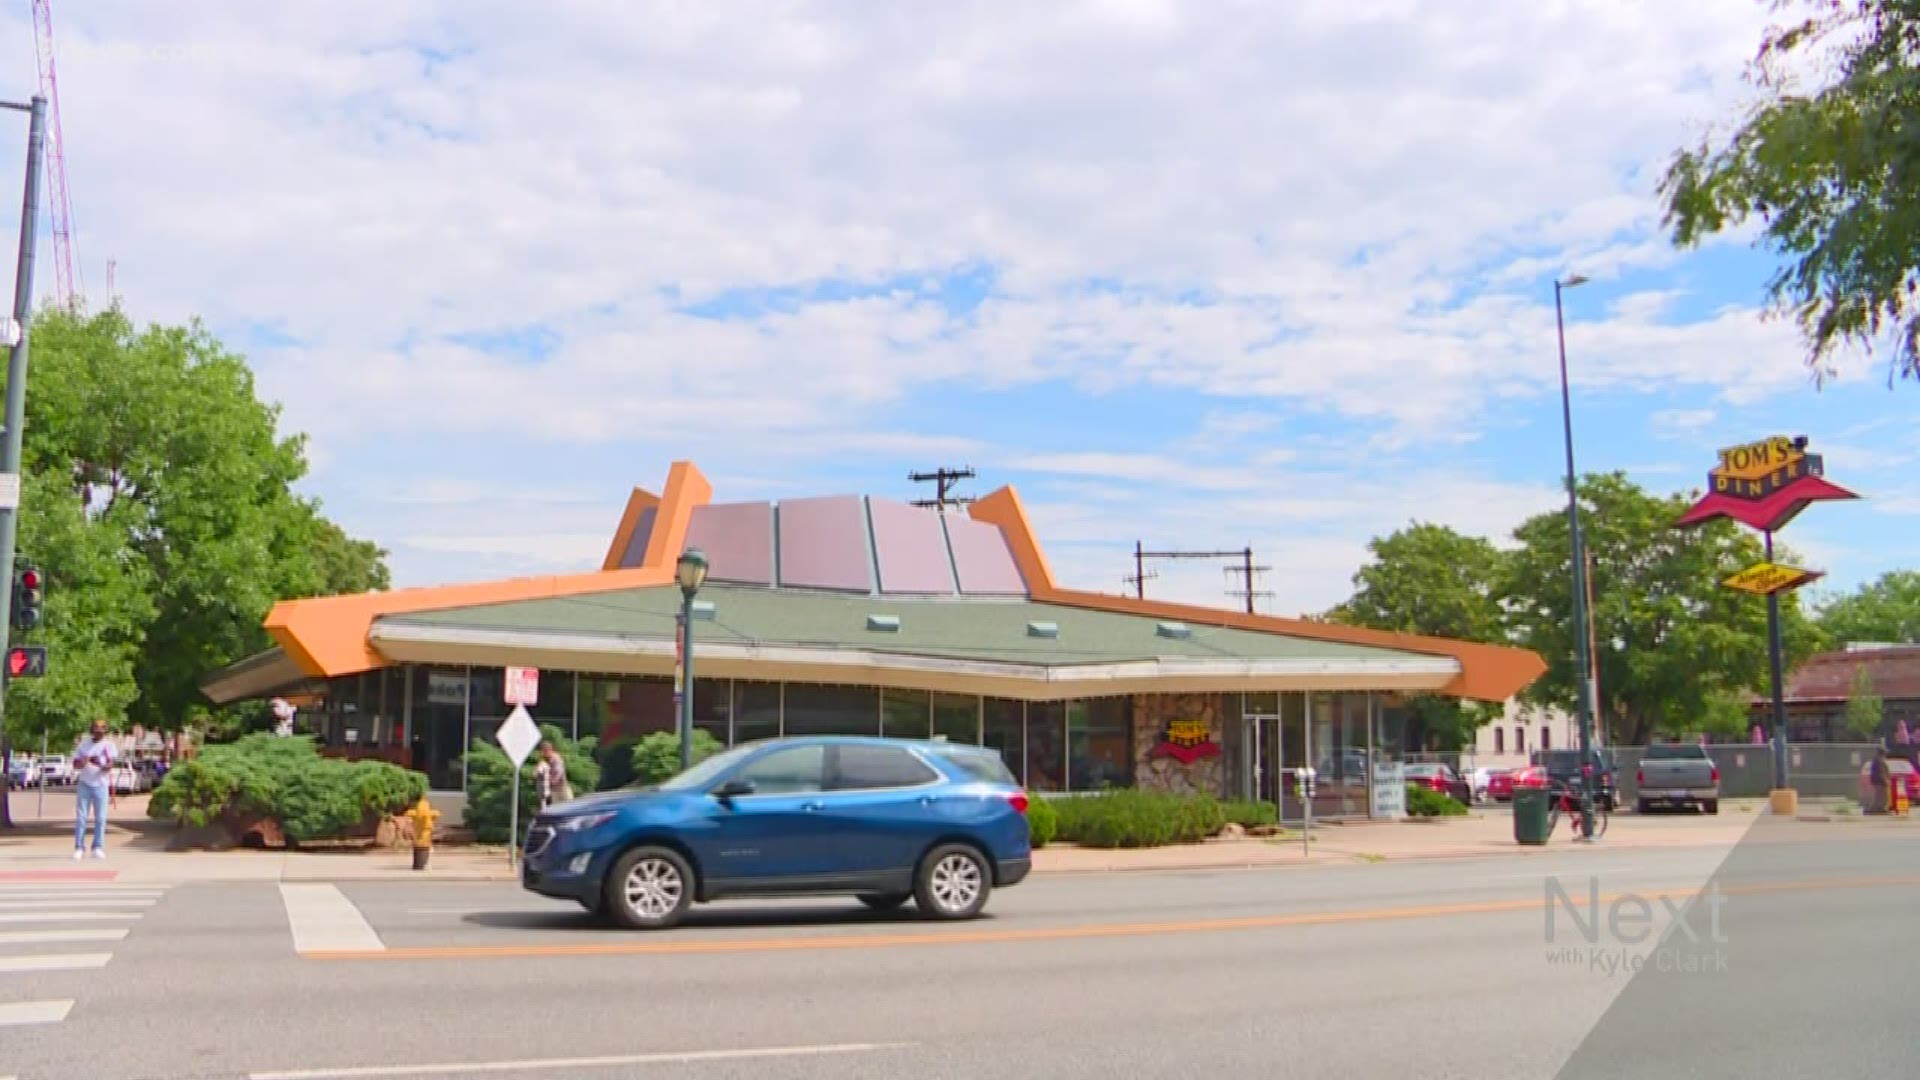 Tom’s Diner will be issued a certificate of “non-historic status” Friday after a group of Denver residents who fought to preserve the East Colfax Avenue restaurant withdrew their application for a historic designation.